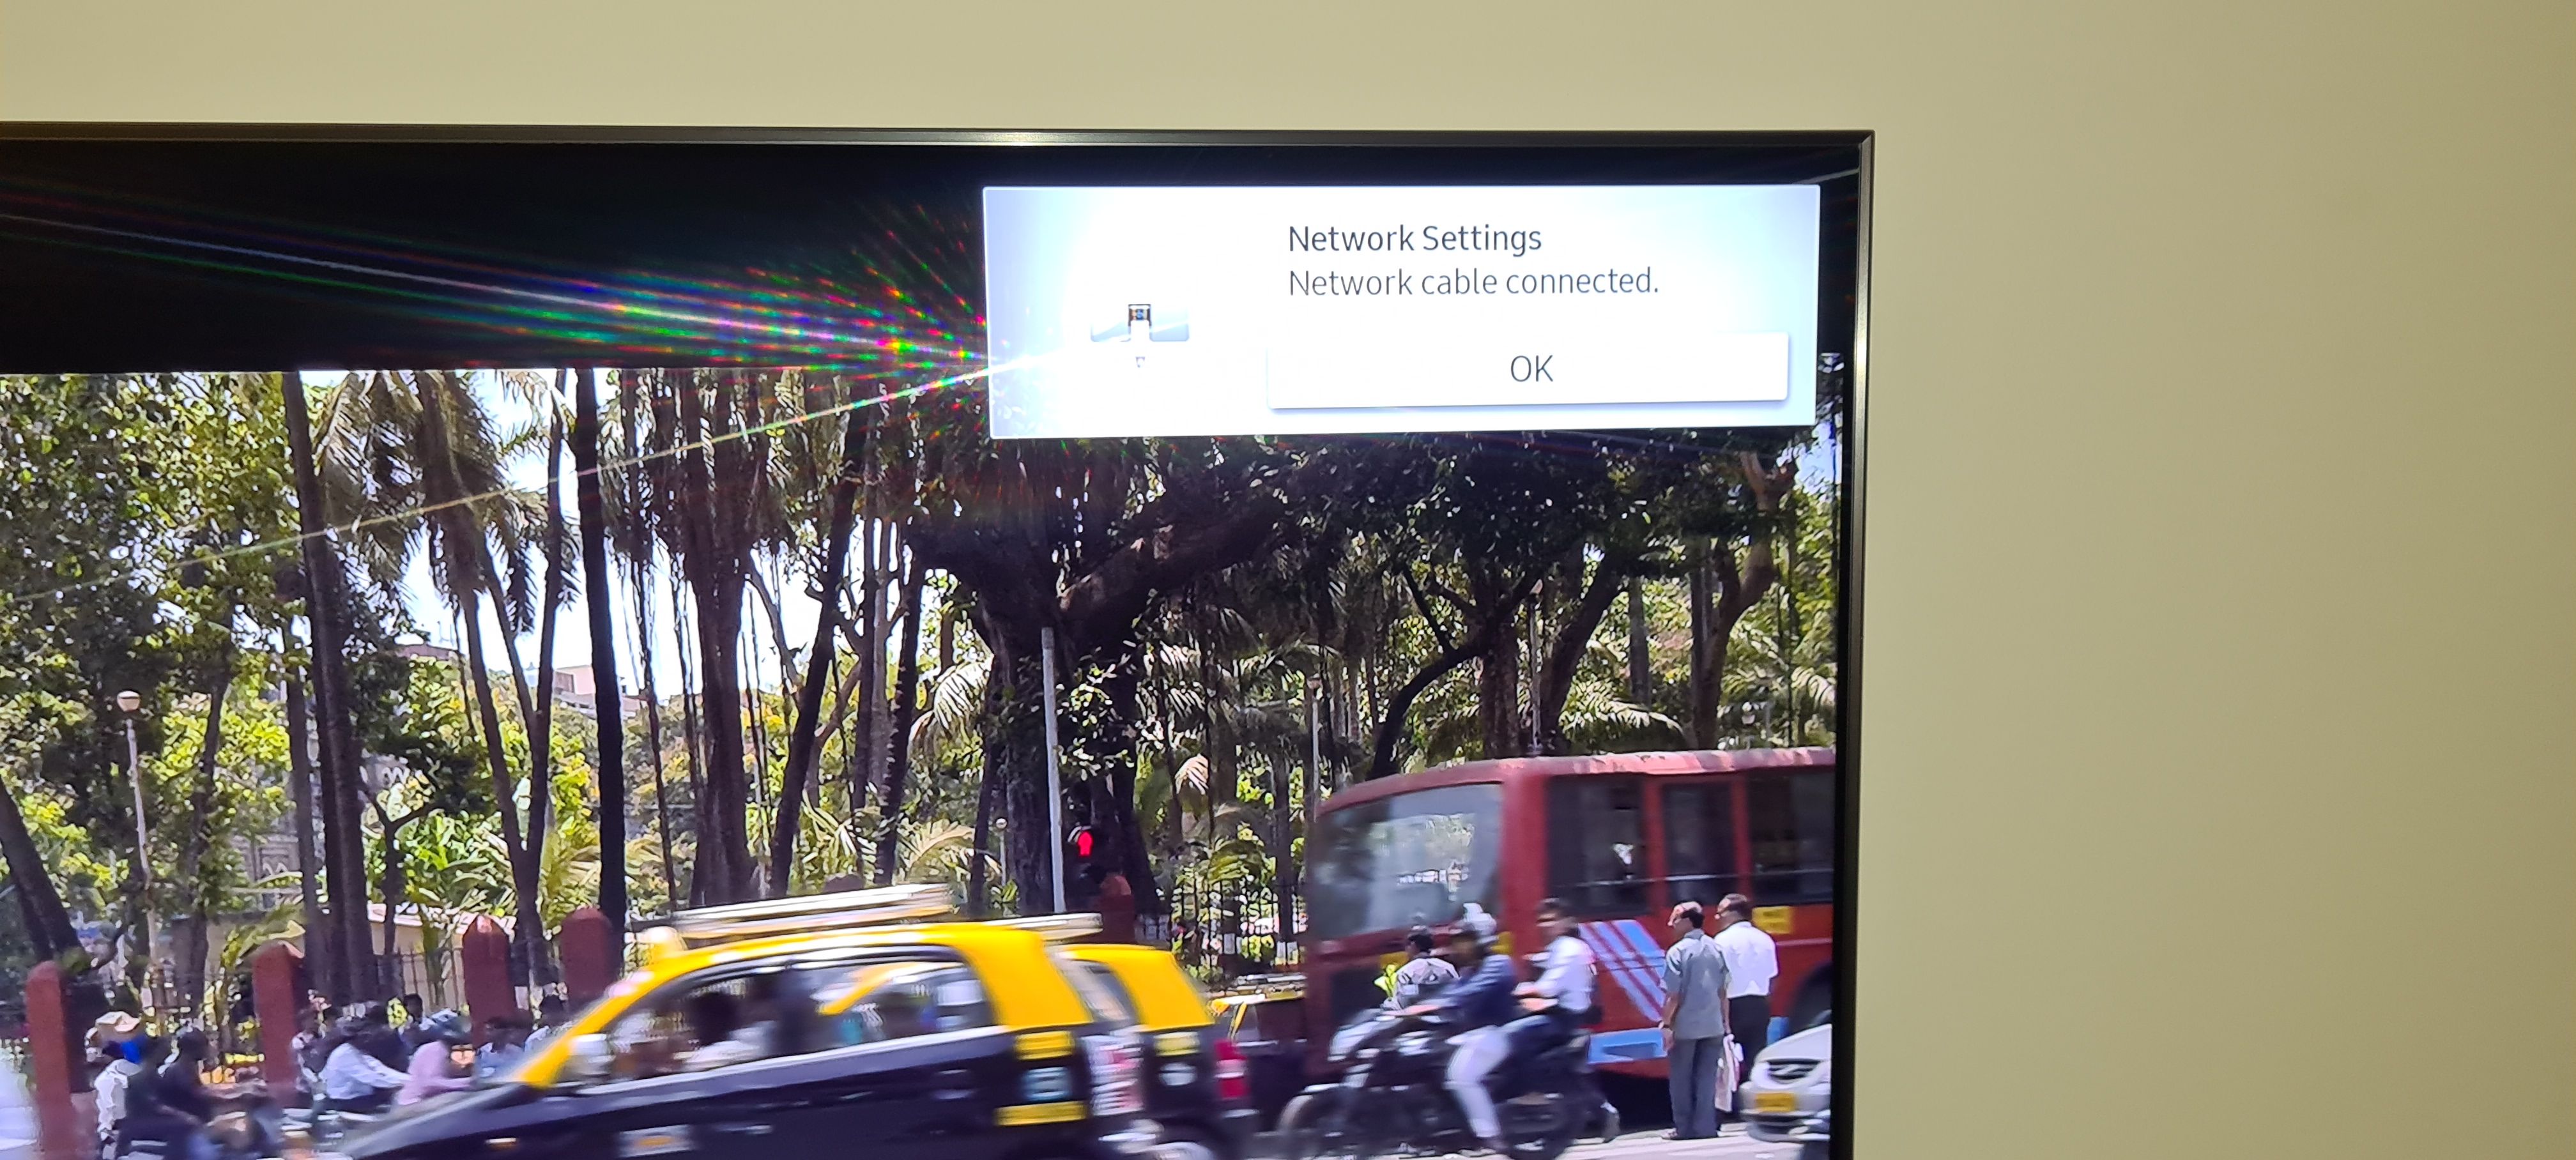 Network Cable Connected" Notification. - Samsung Community